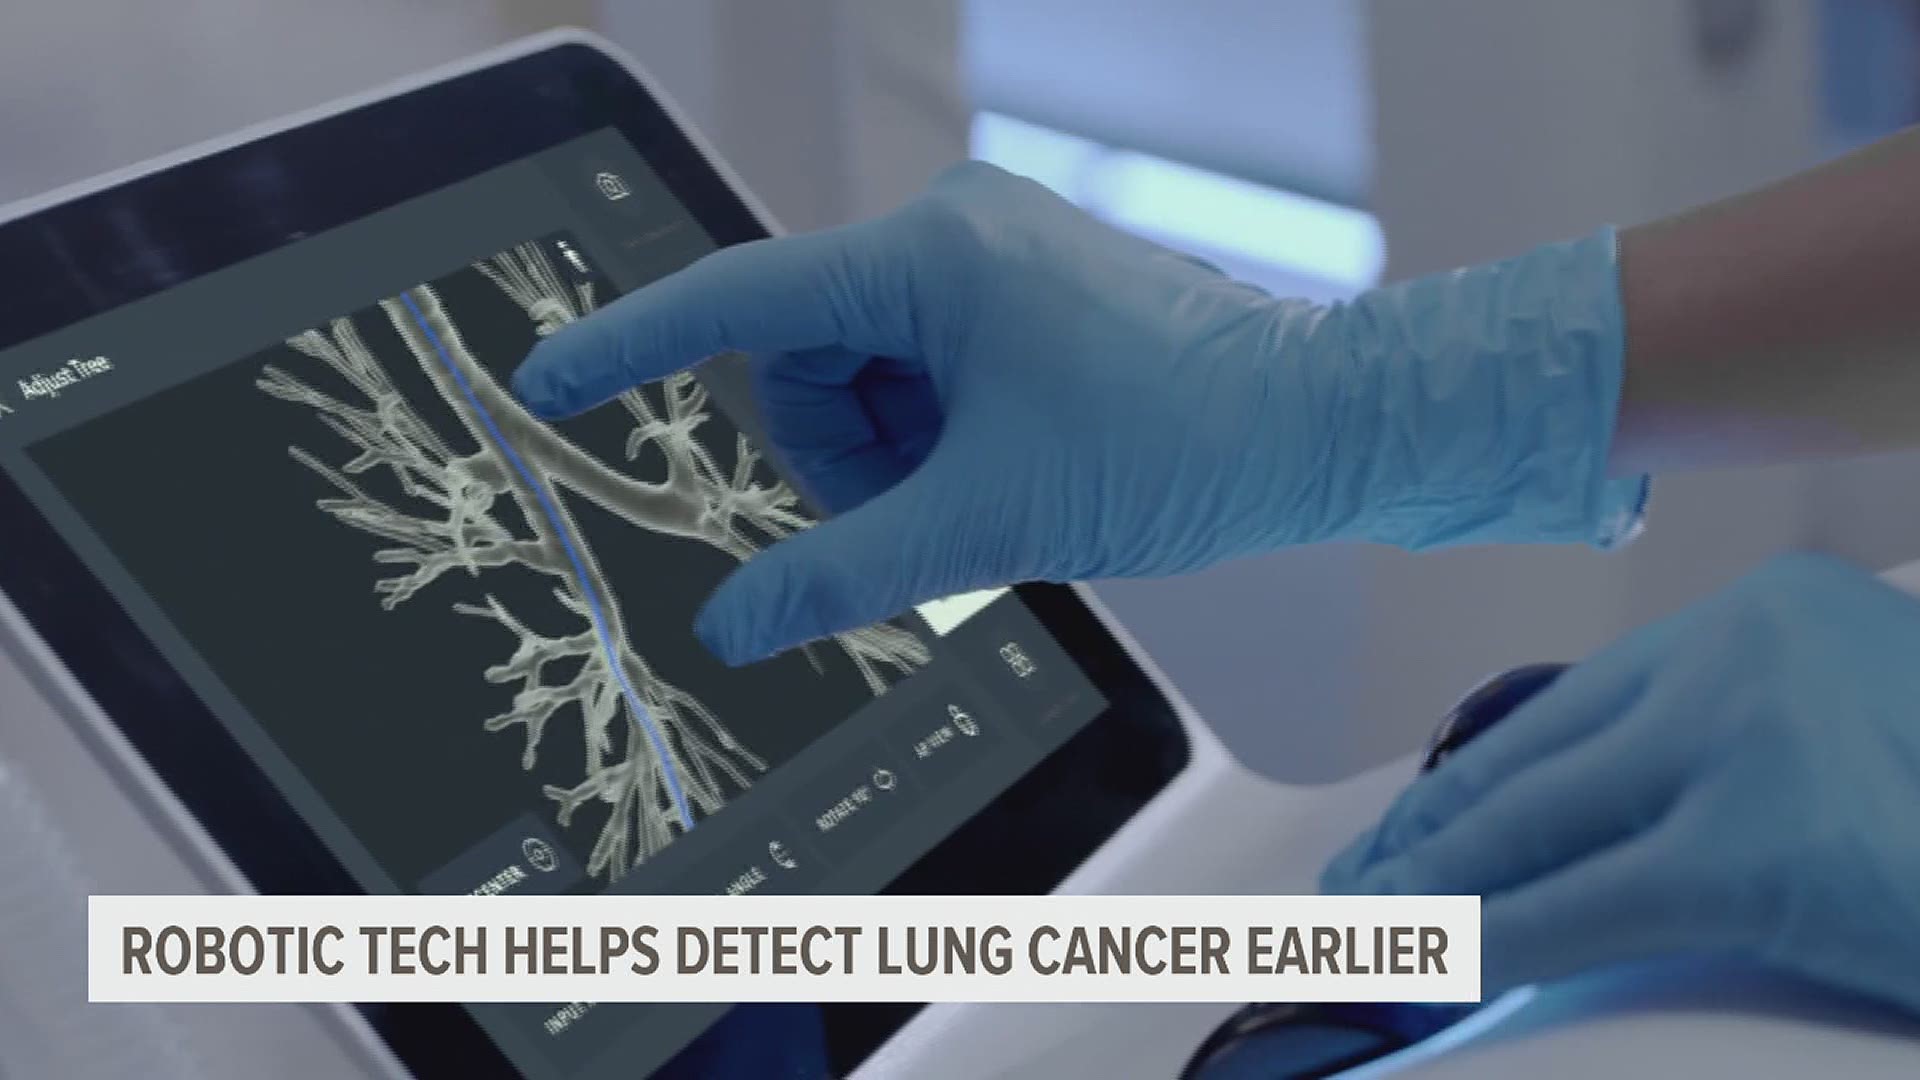 More than 90% of people diagnosed with lung cancer don't survive because it's found too late.